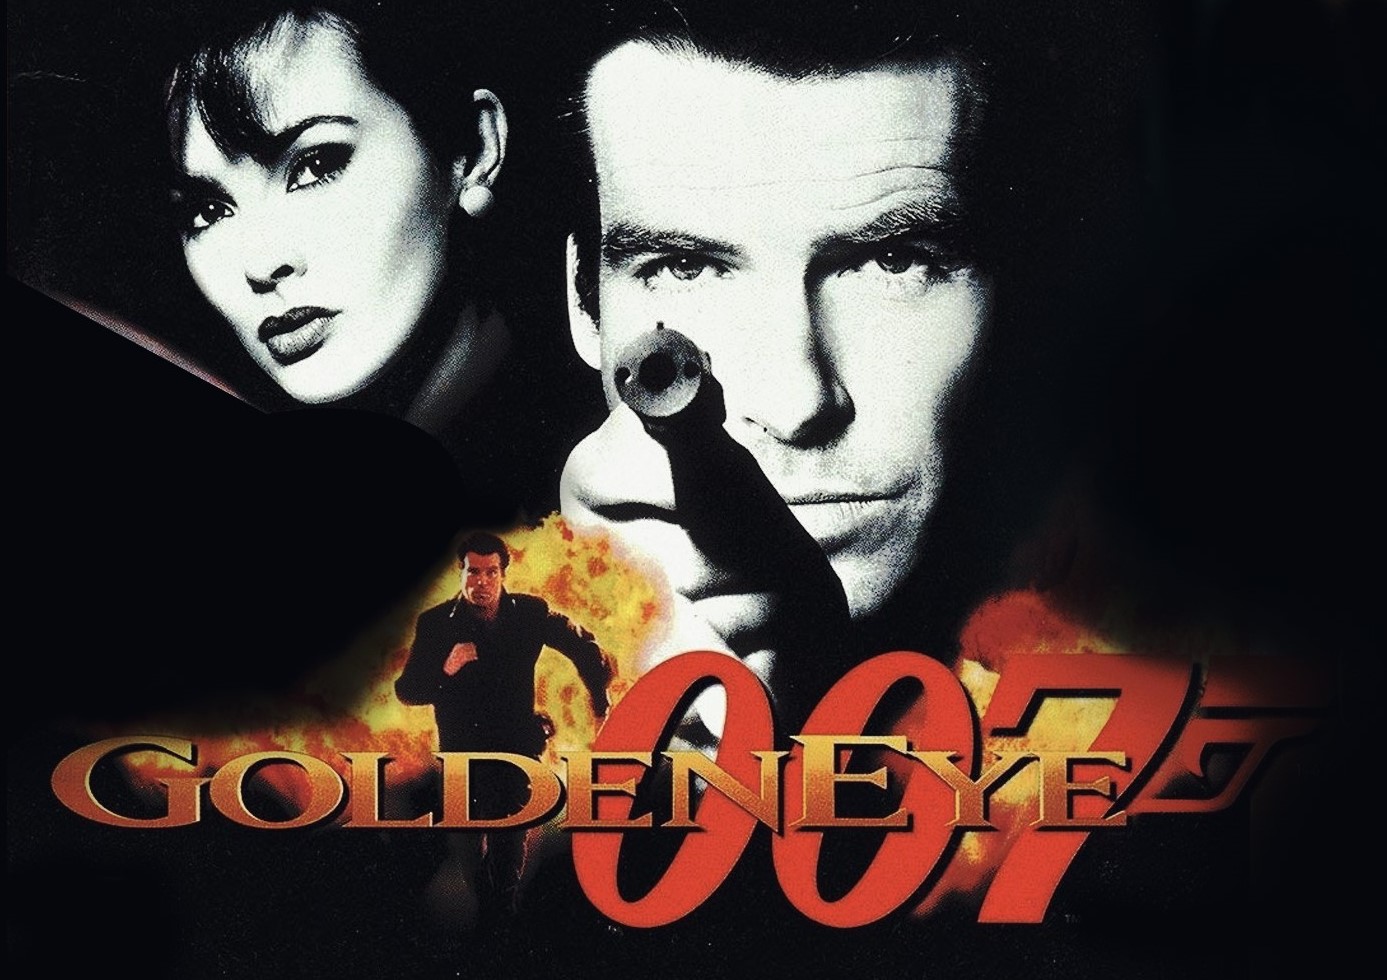 GoldenEye 007 is a 1997 first-person shooter developed by Rare and published by Nintendo for the Nintendo 64.